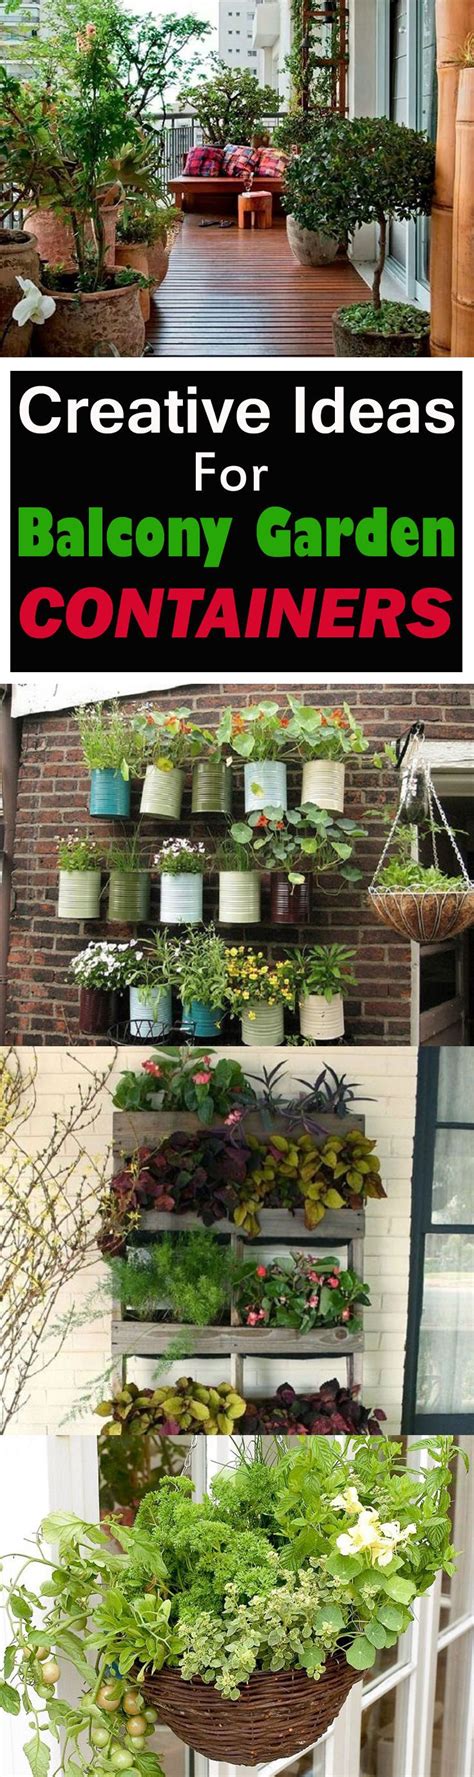 Best Of Home And Garden Creative Ideas For Balcony Garden Containers